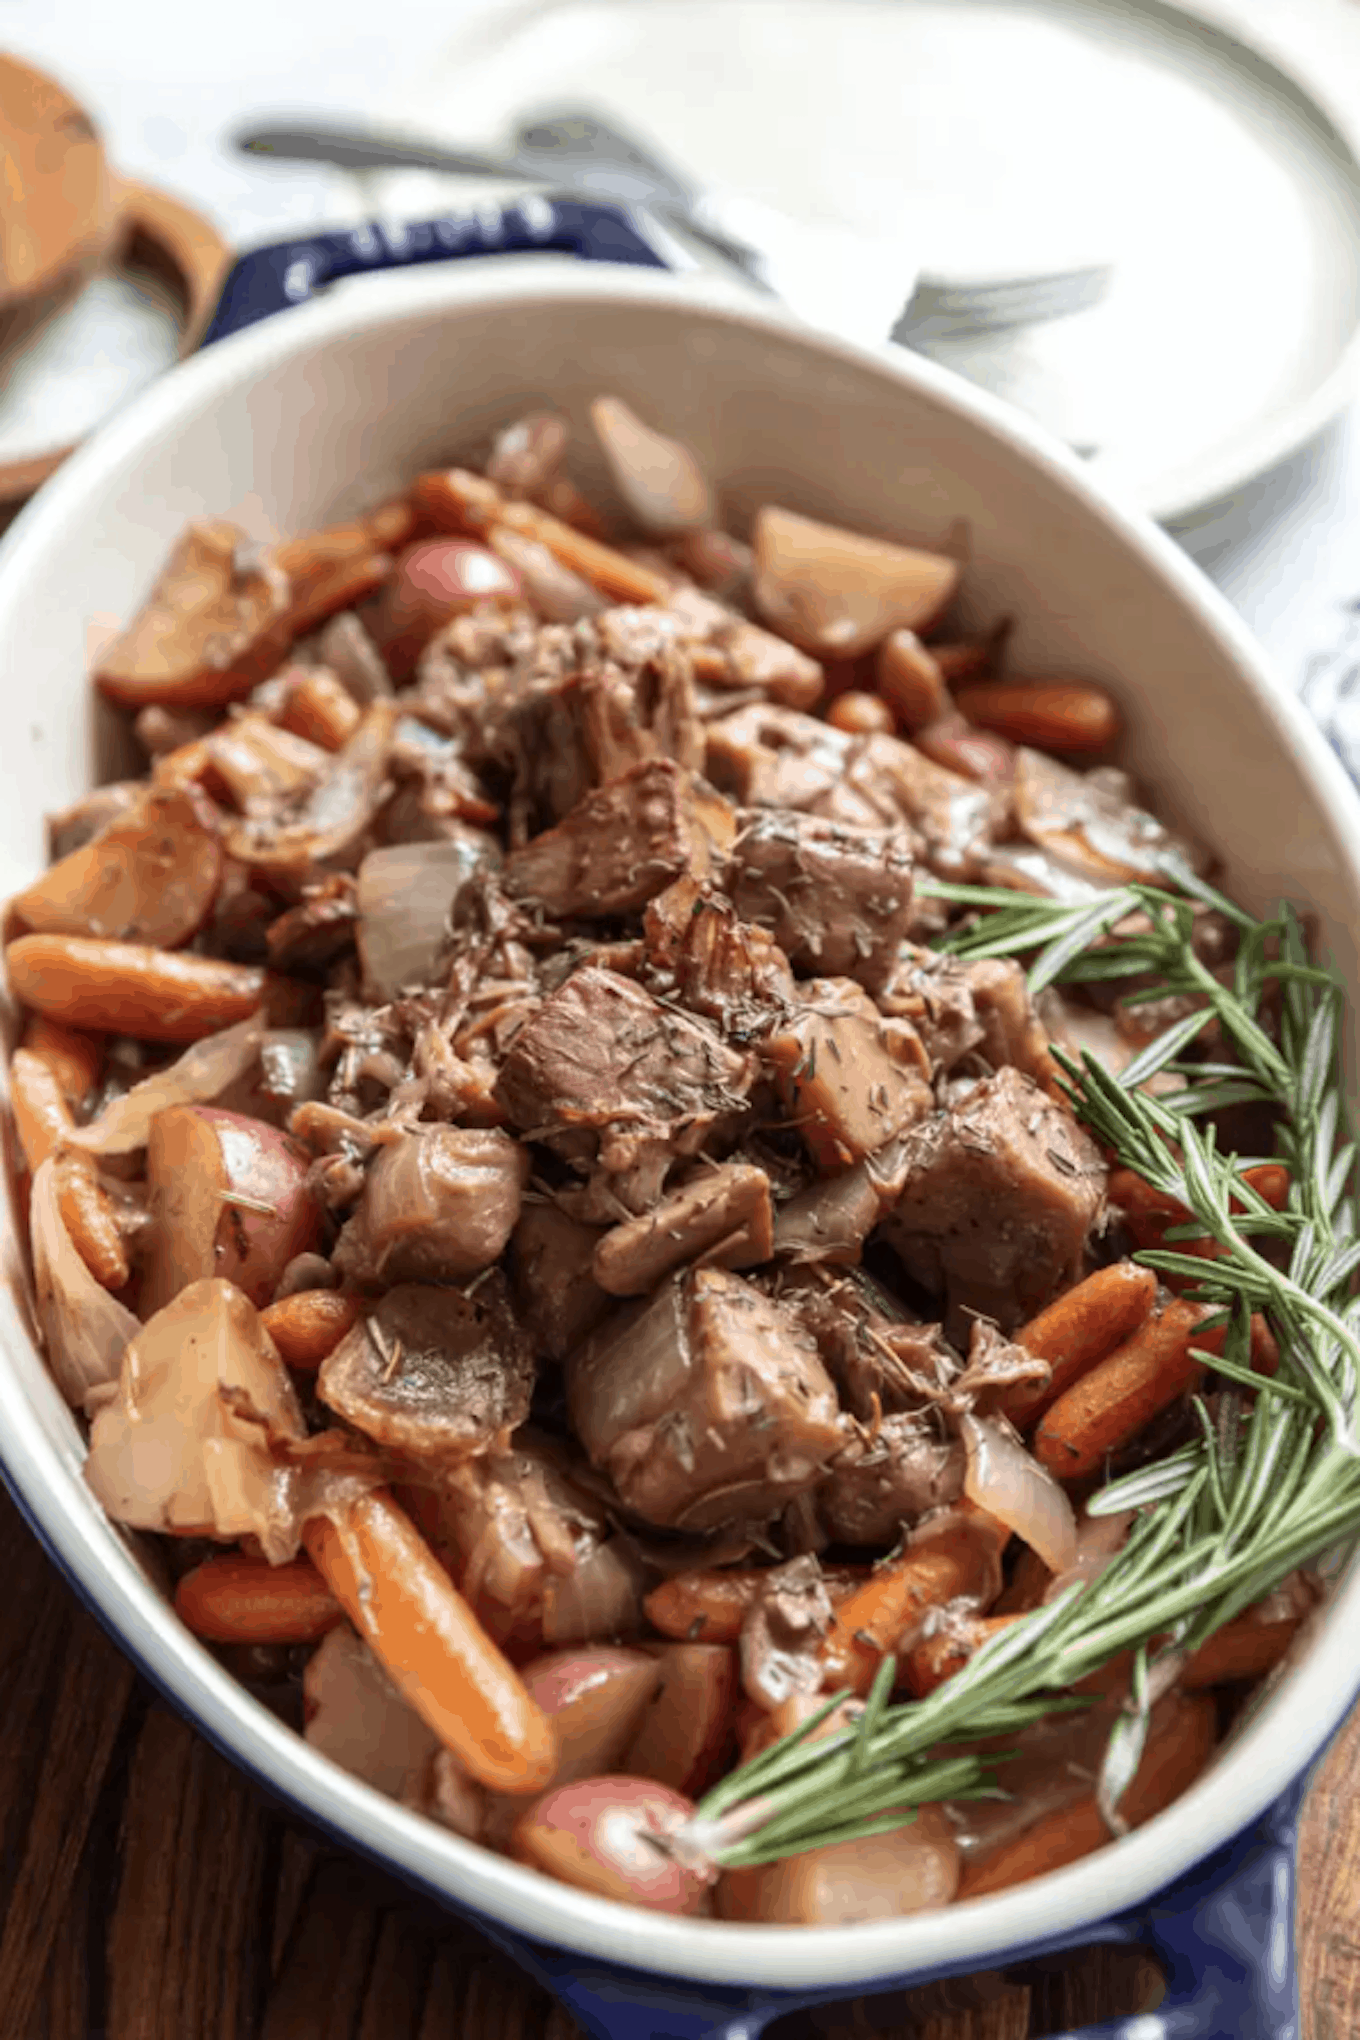 plant-based thanksgiving recipe of pot roast made with jackfruit with carrots, potatoes, and herbs